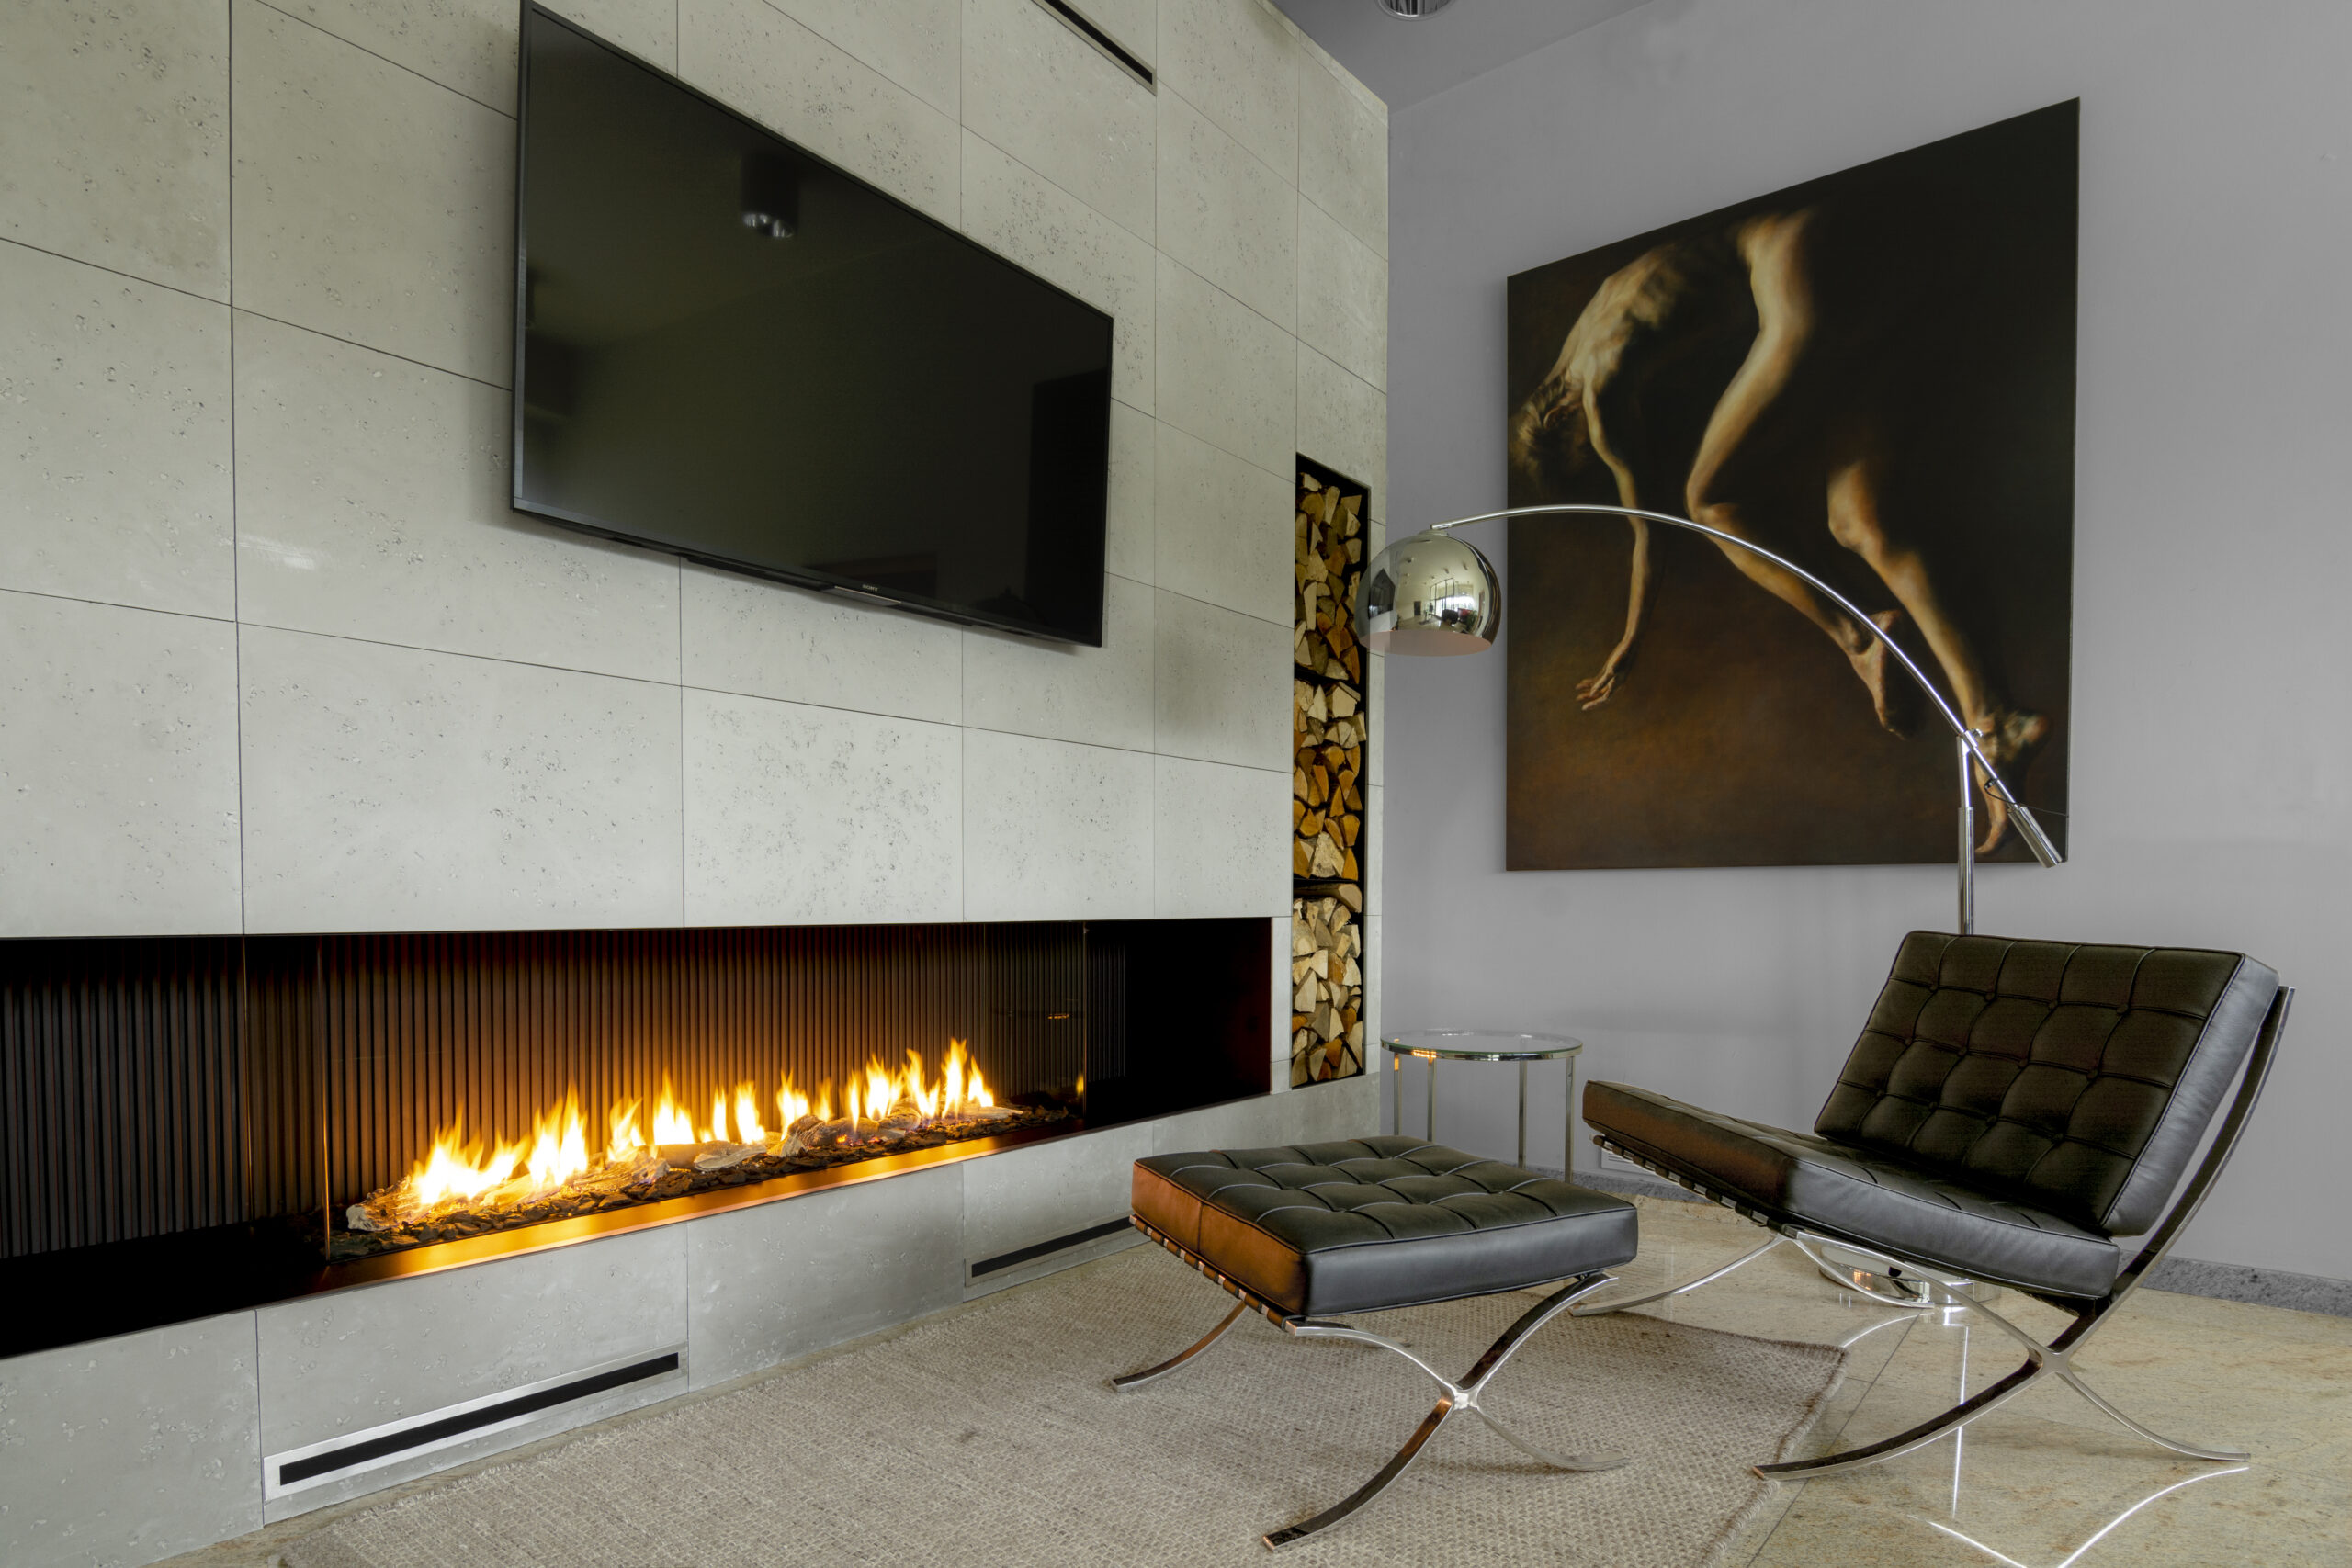 TV installed above an ethanol fireplace